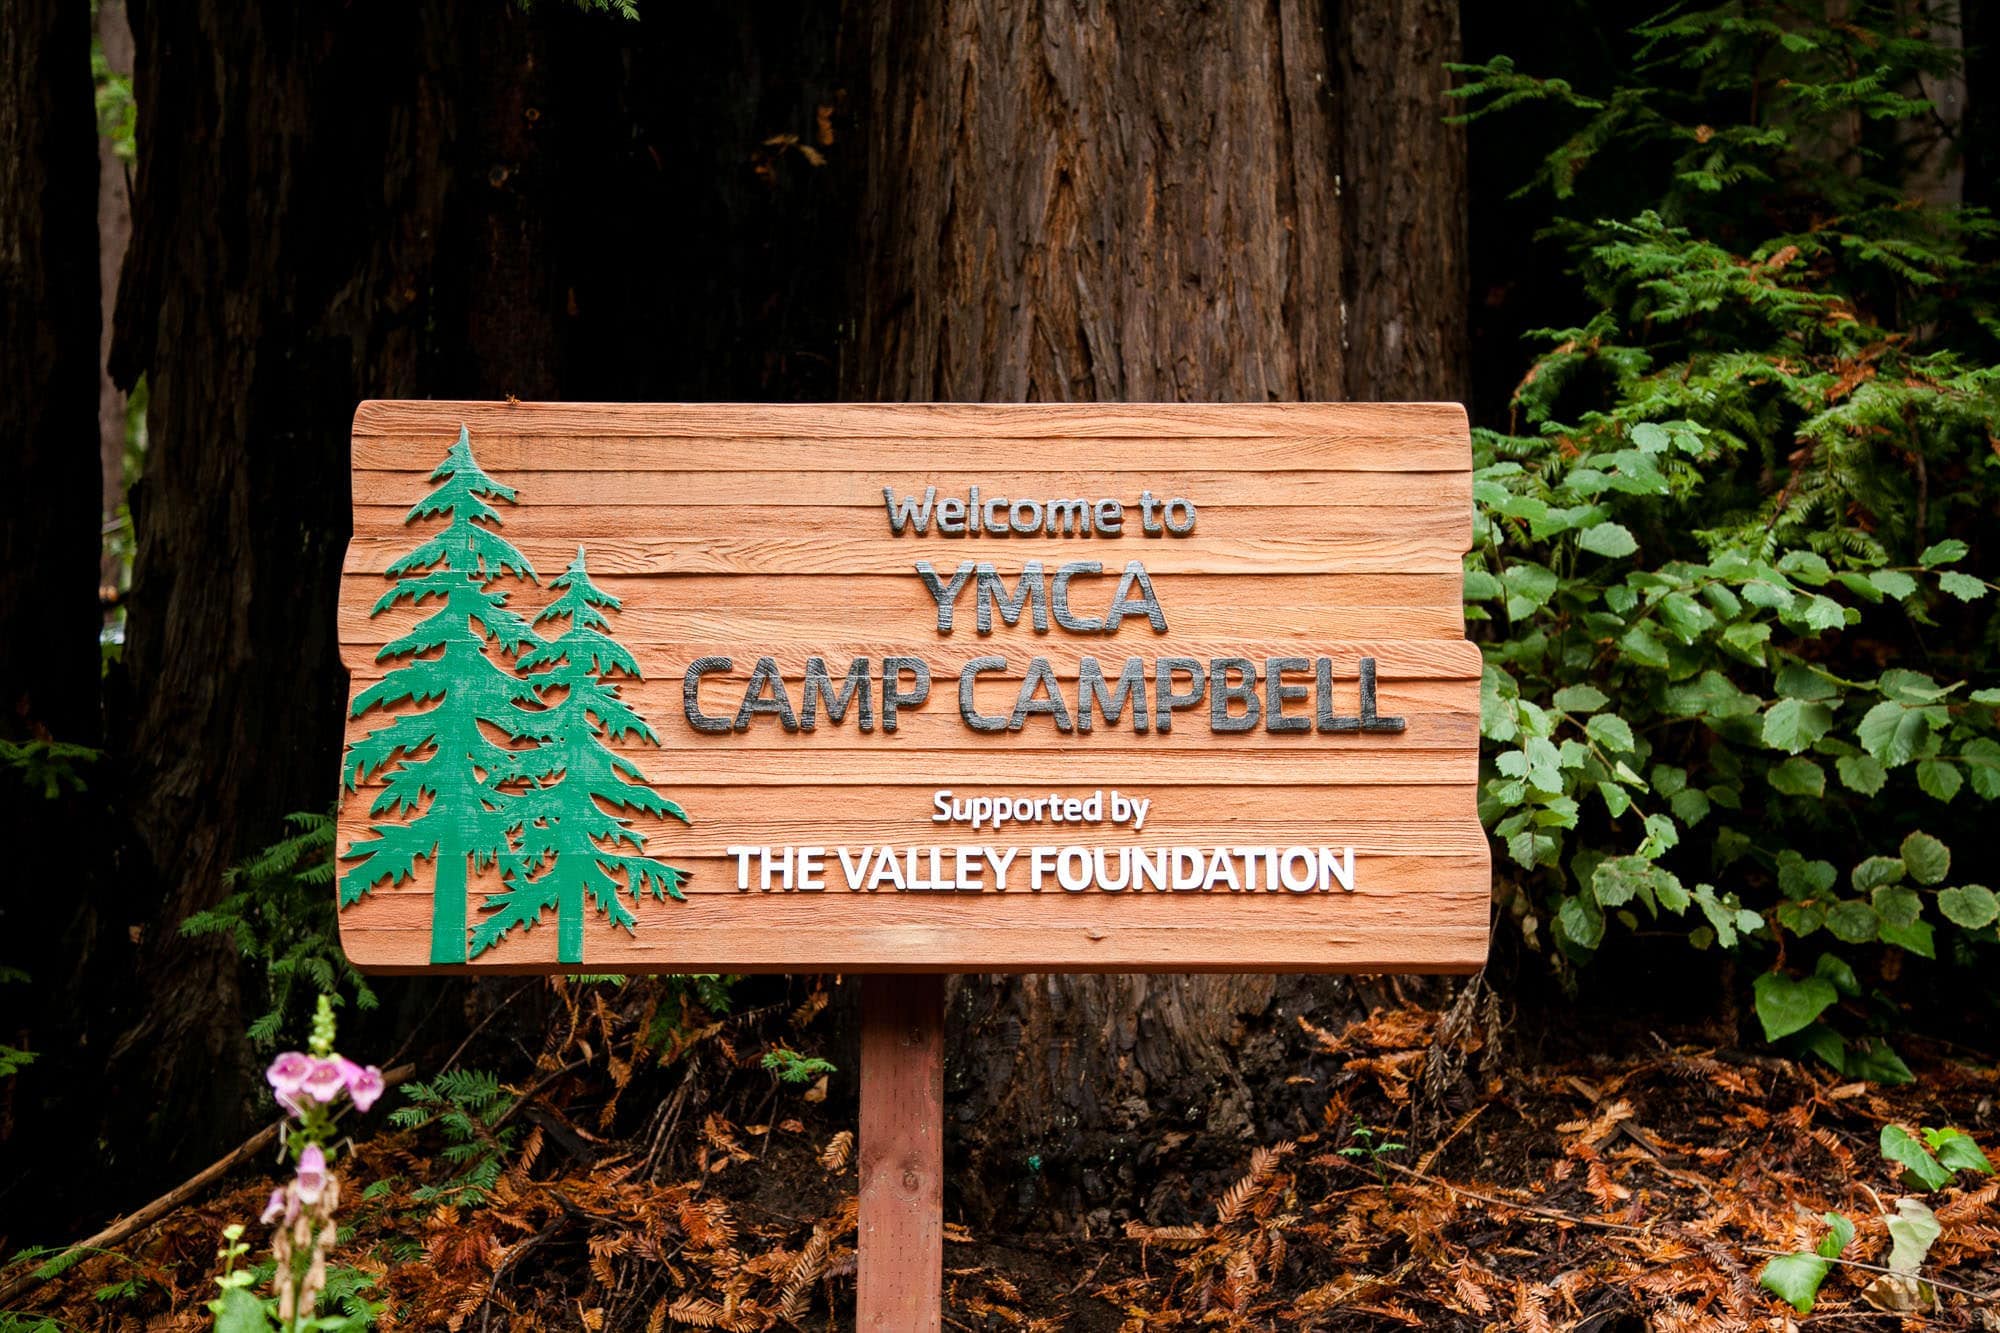 Sign of the YMCA camp campbell